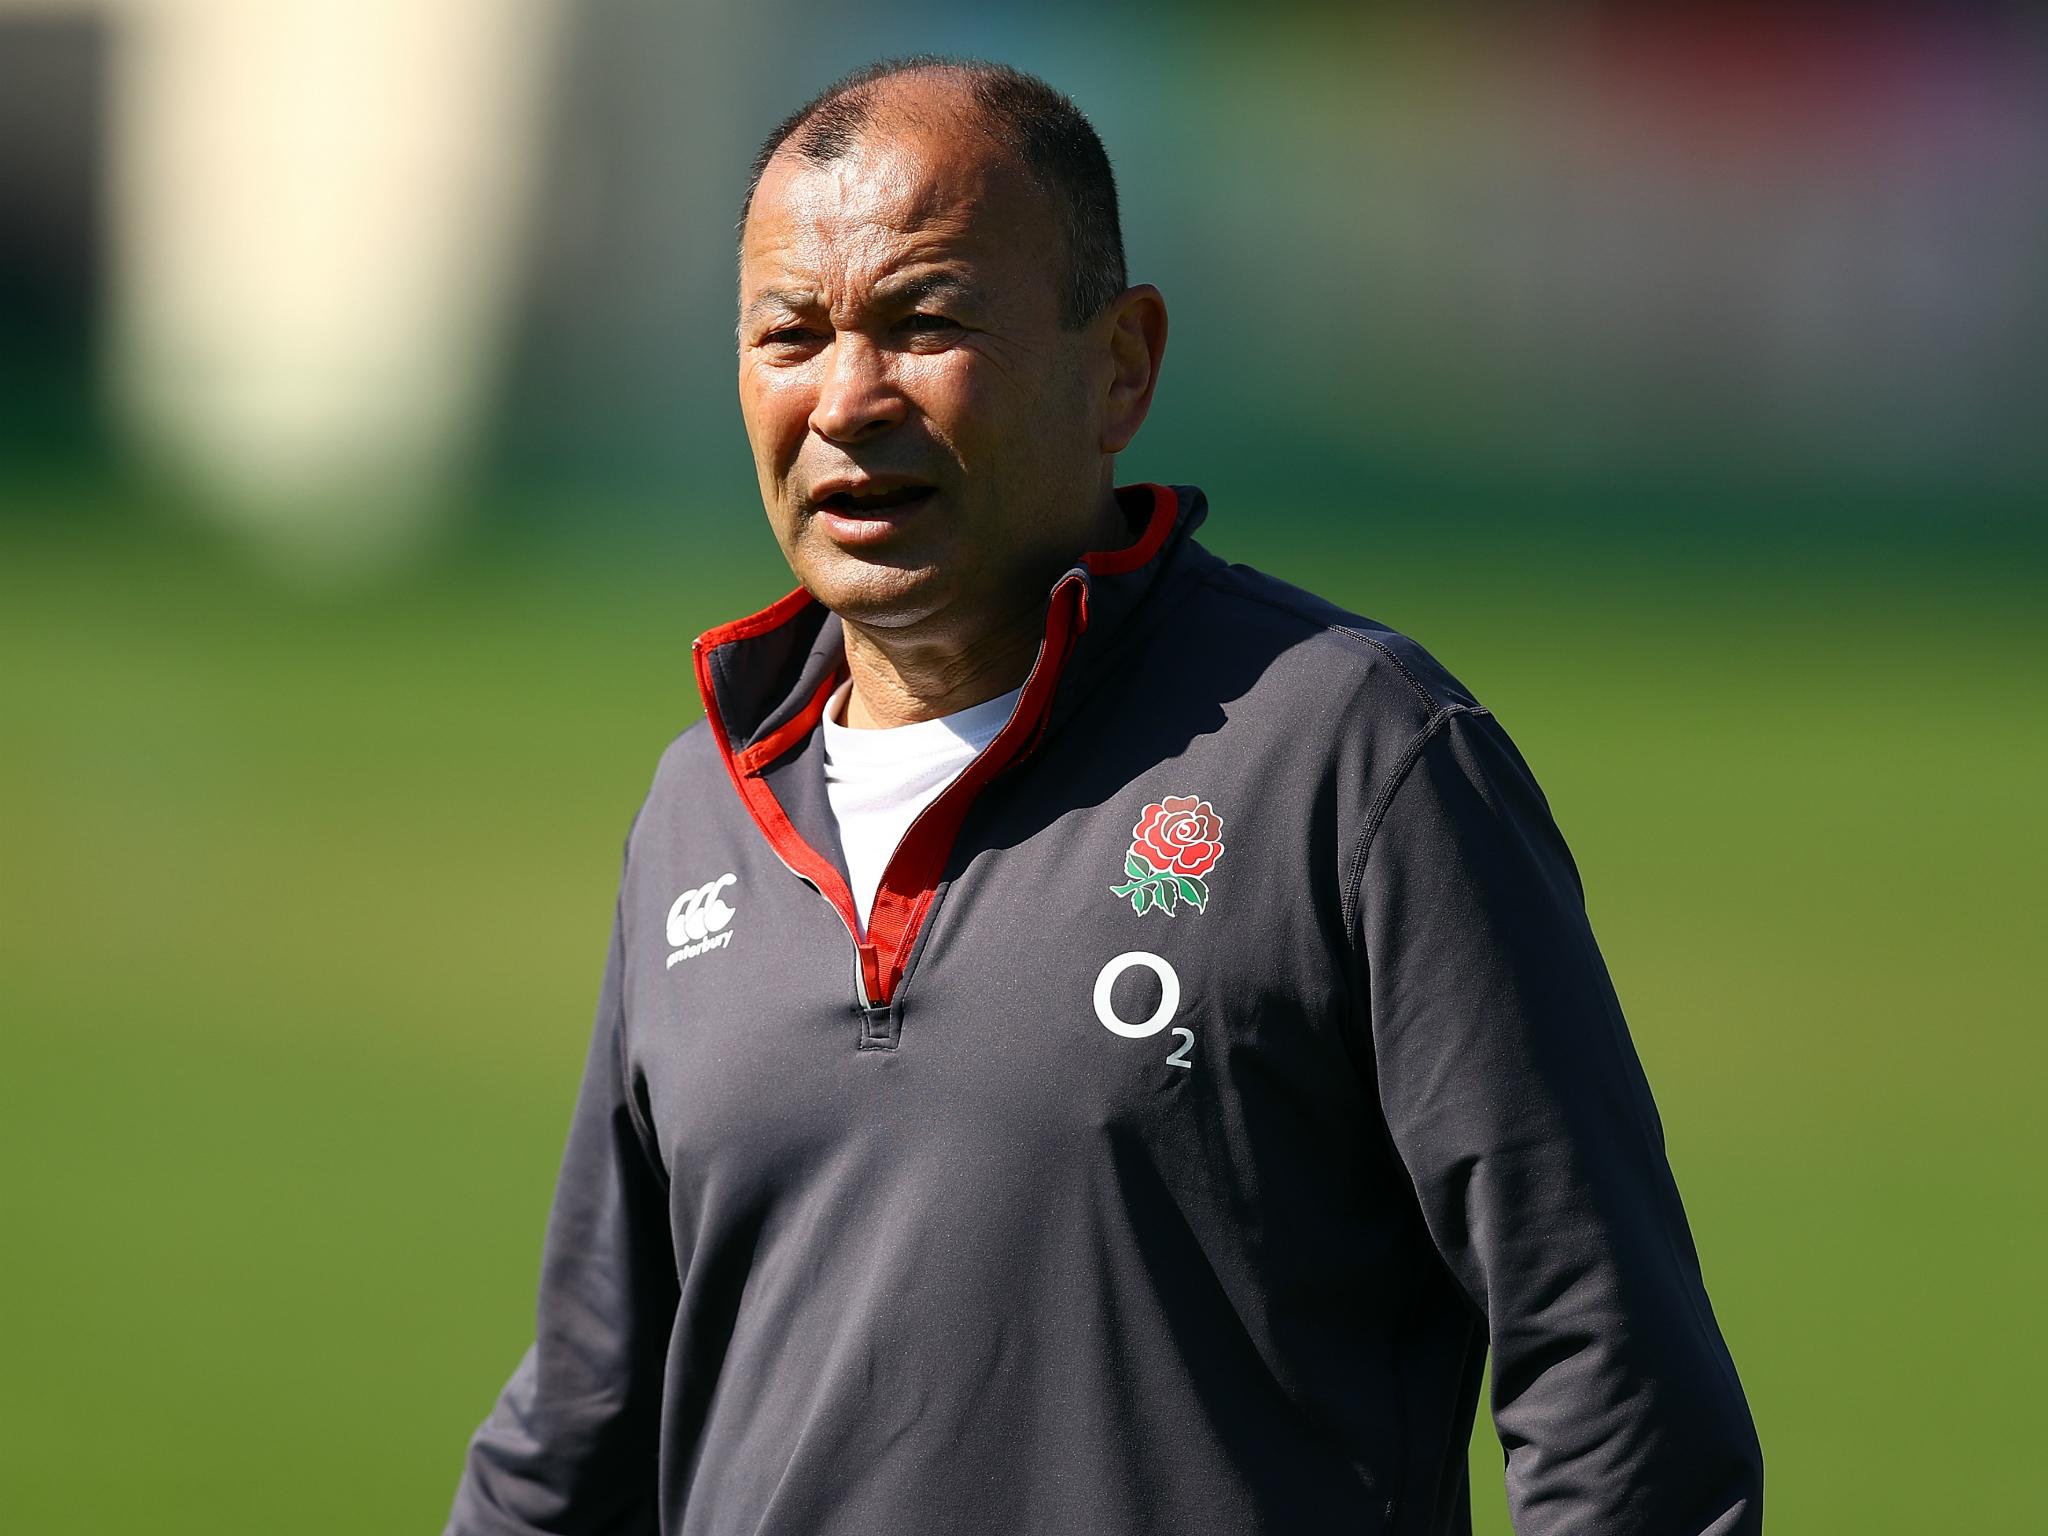 Eddie Jones will lose his defence coach Paul Gustard after England's tour of South Africa